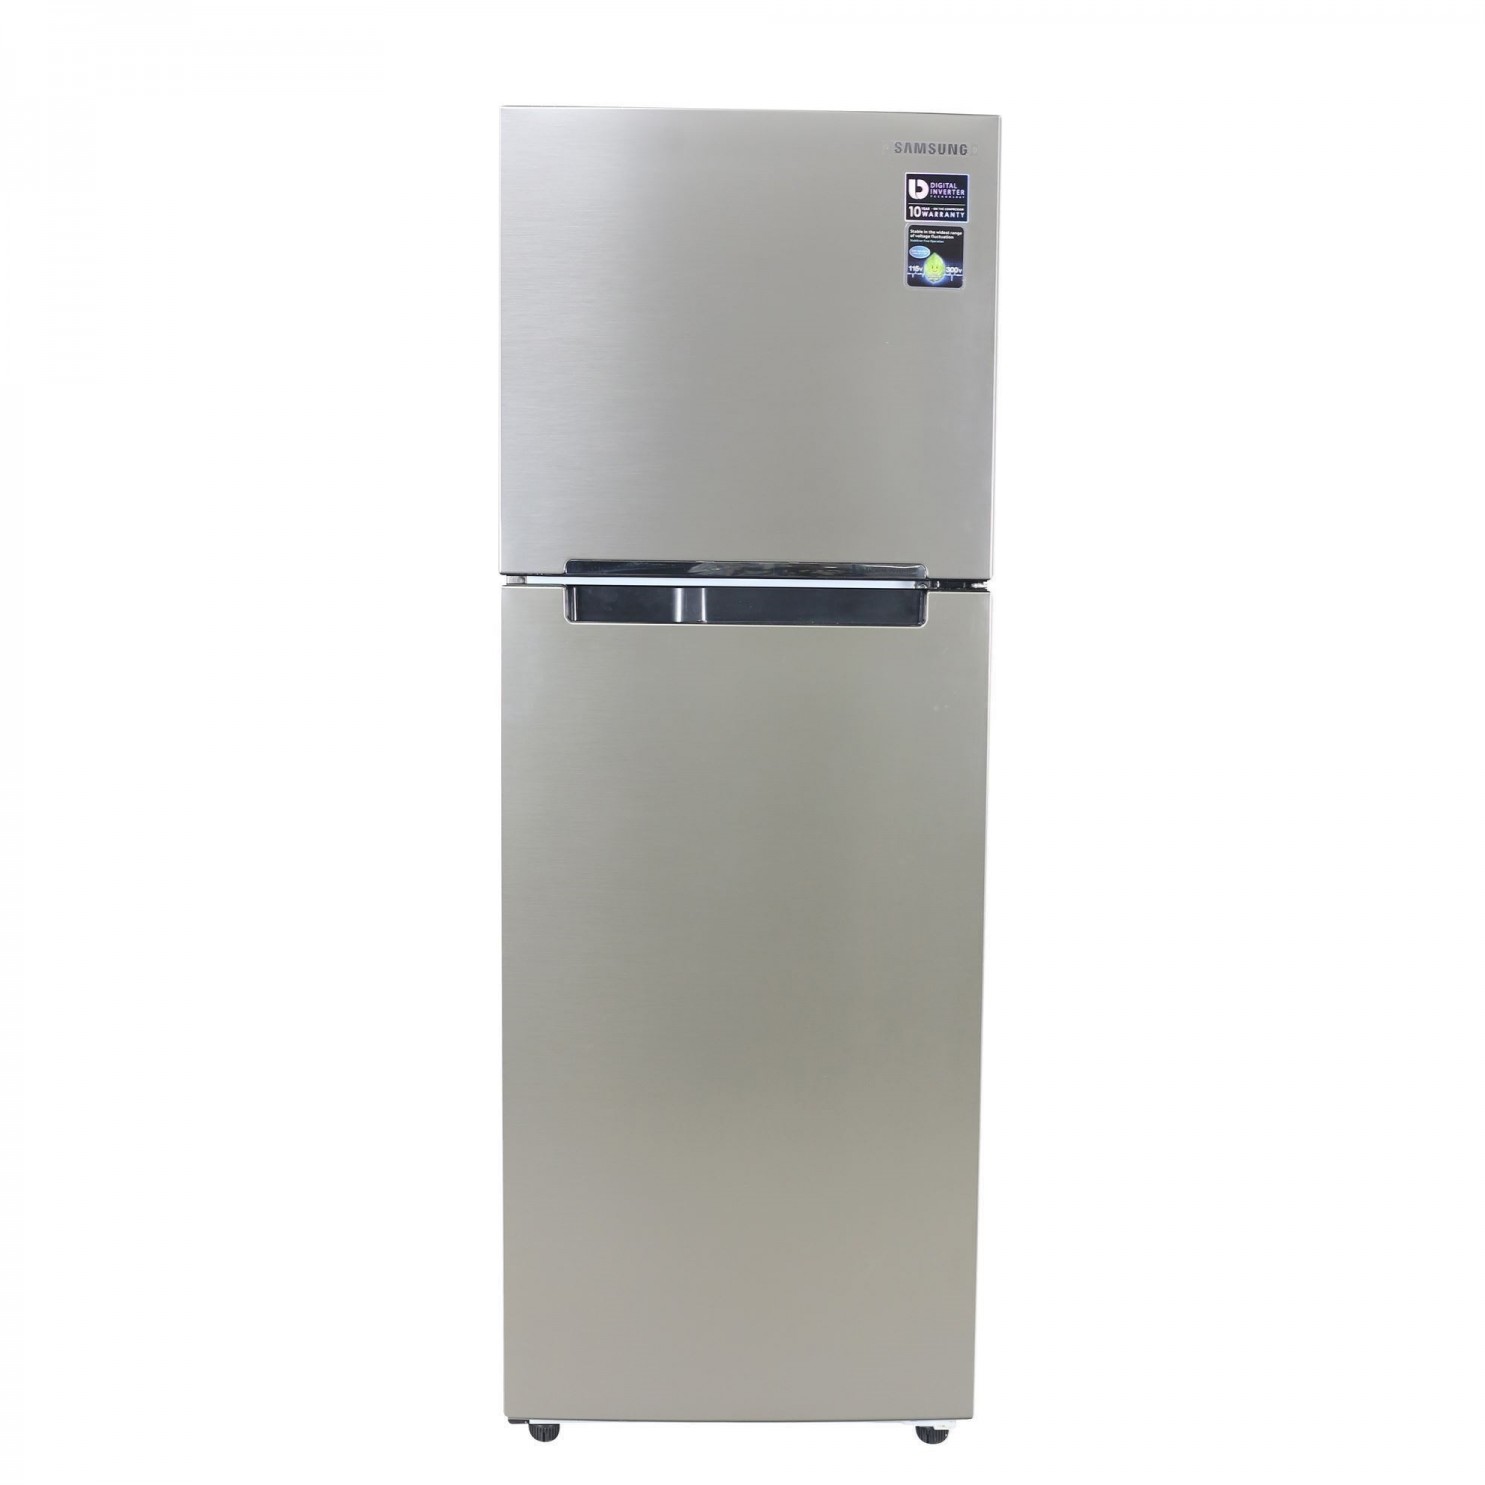 Best Samsung NonFrost Refrigerator Price And Reviews In Bangladesh